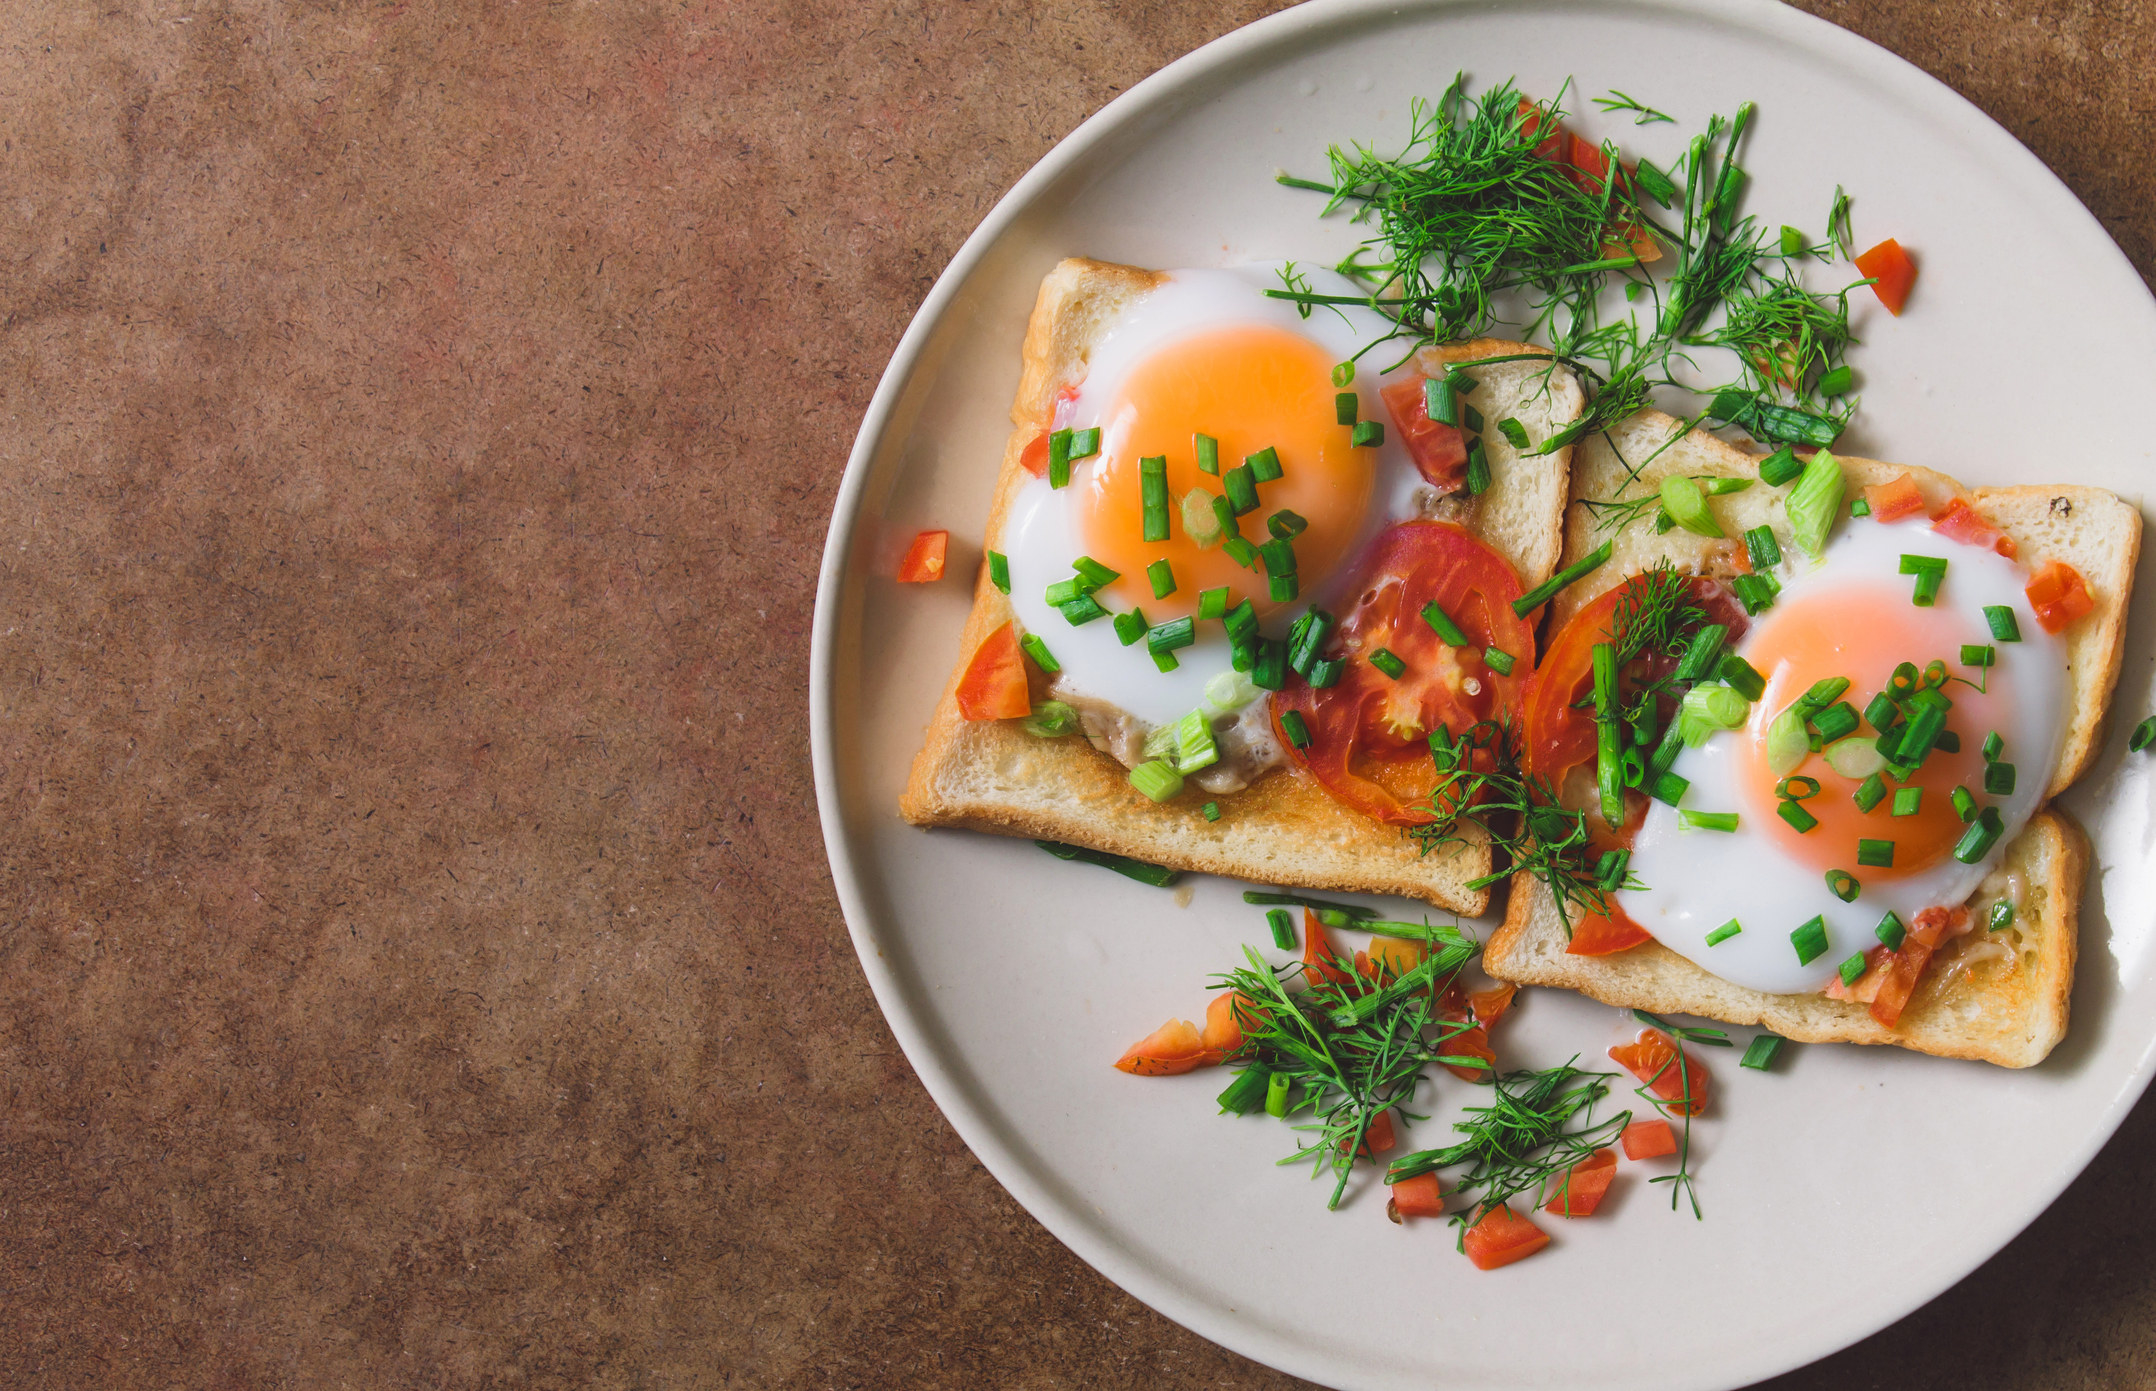 Toast topped with sunny side up eggs and veggies.